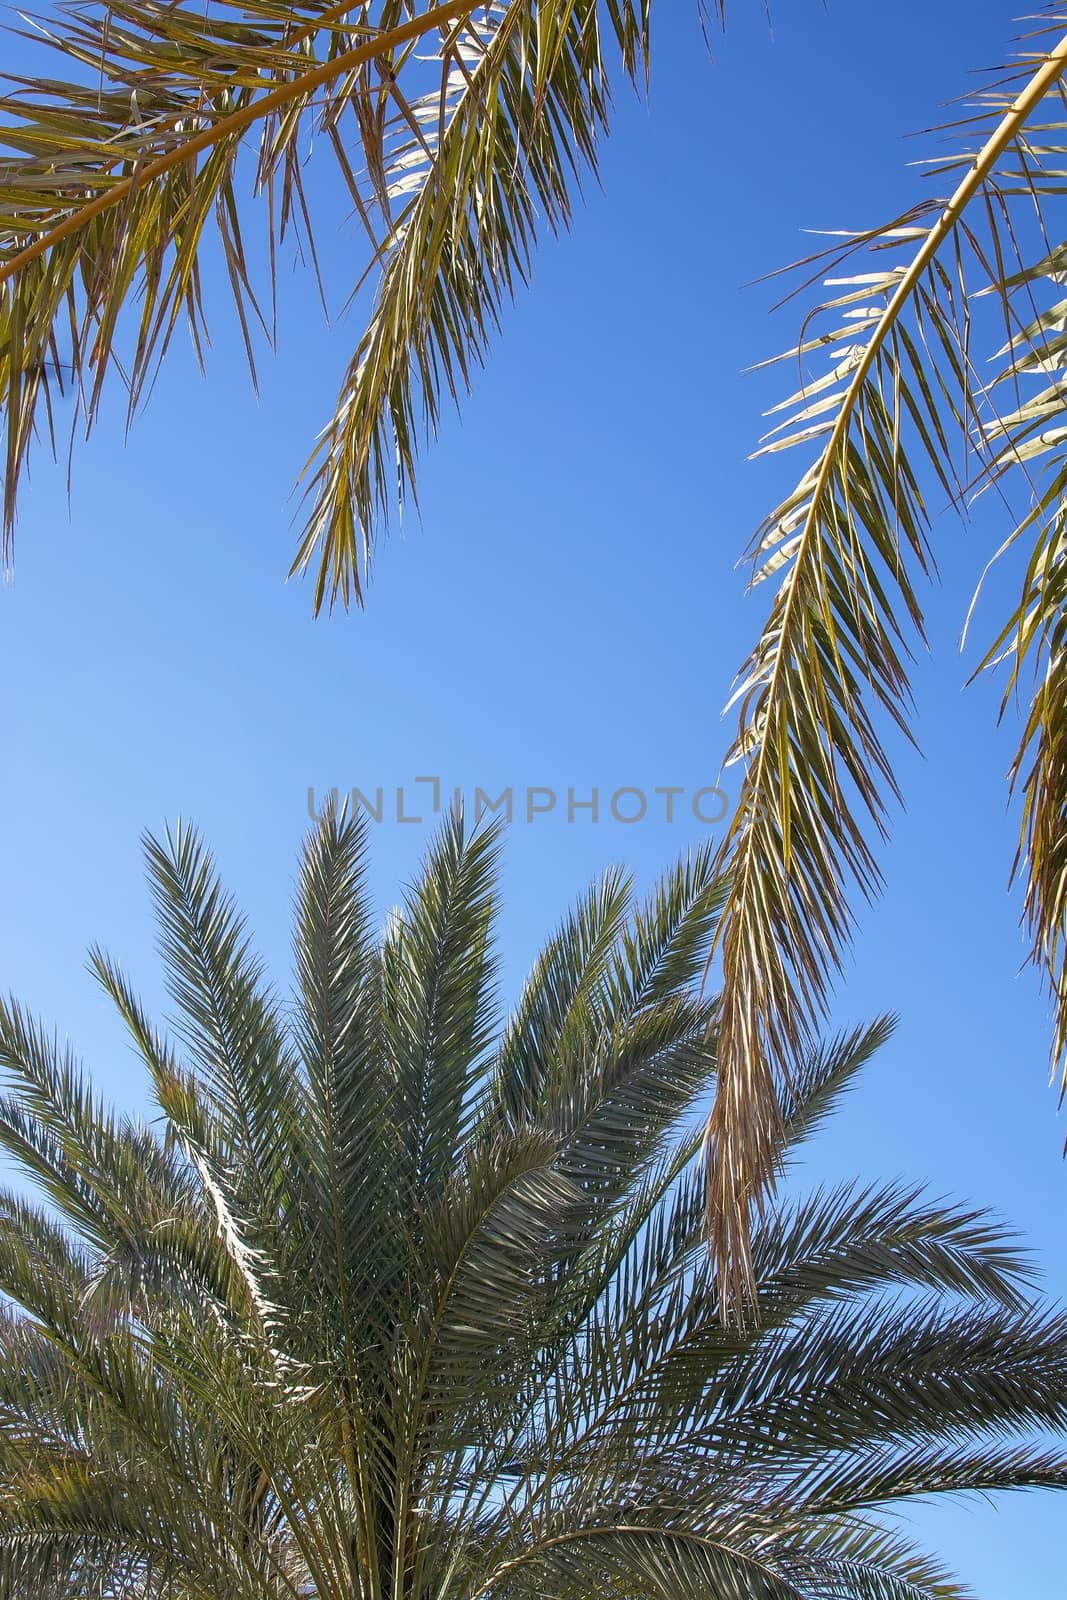 Vertical image of new fresh and yellow old palm tree foliage closeup against blue sky on a sunny spring day in Mallorca, Spain.